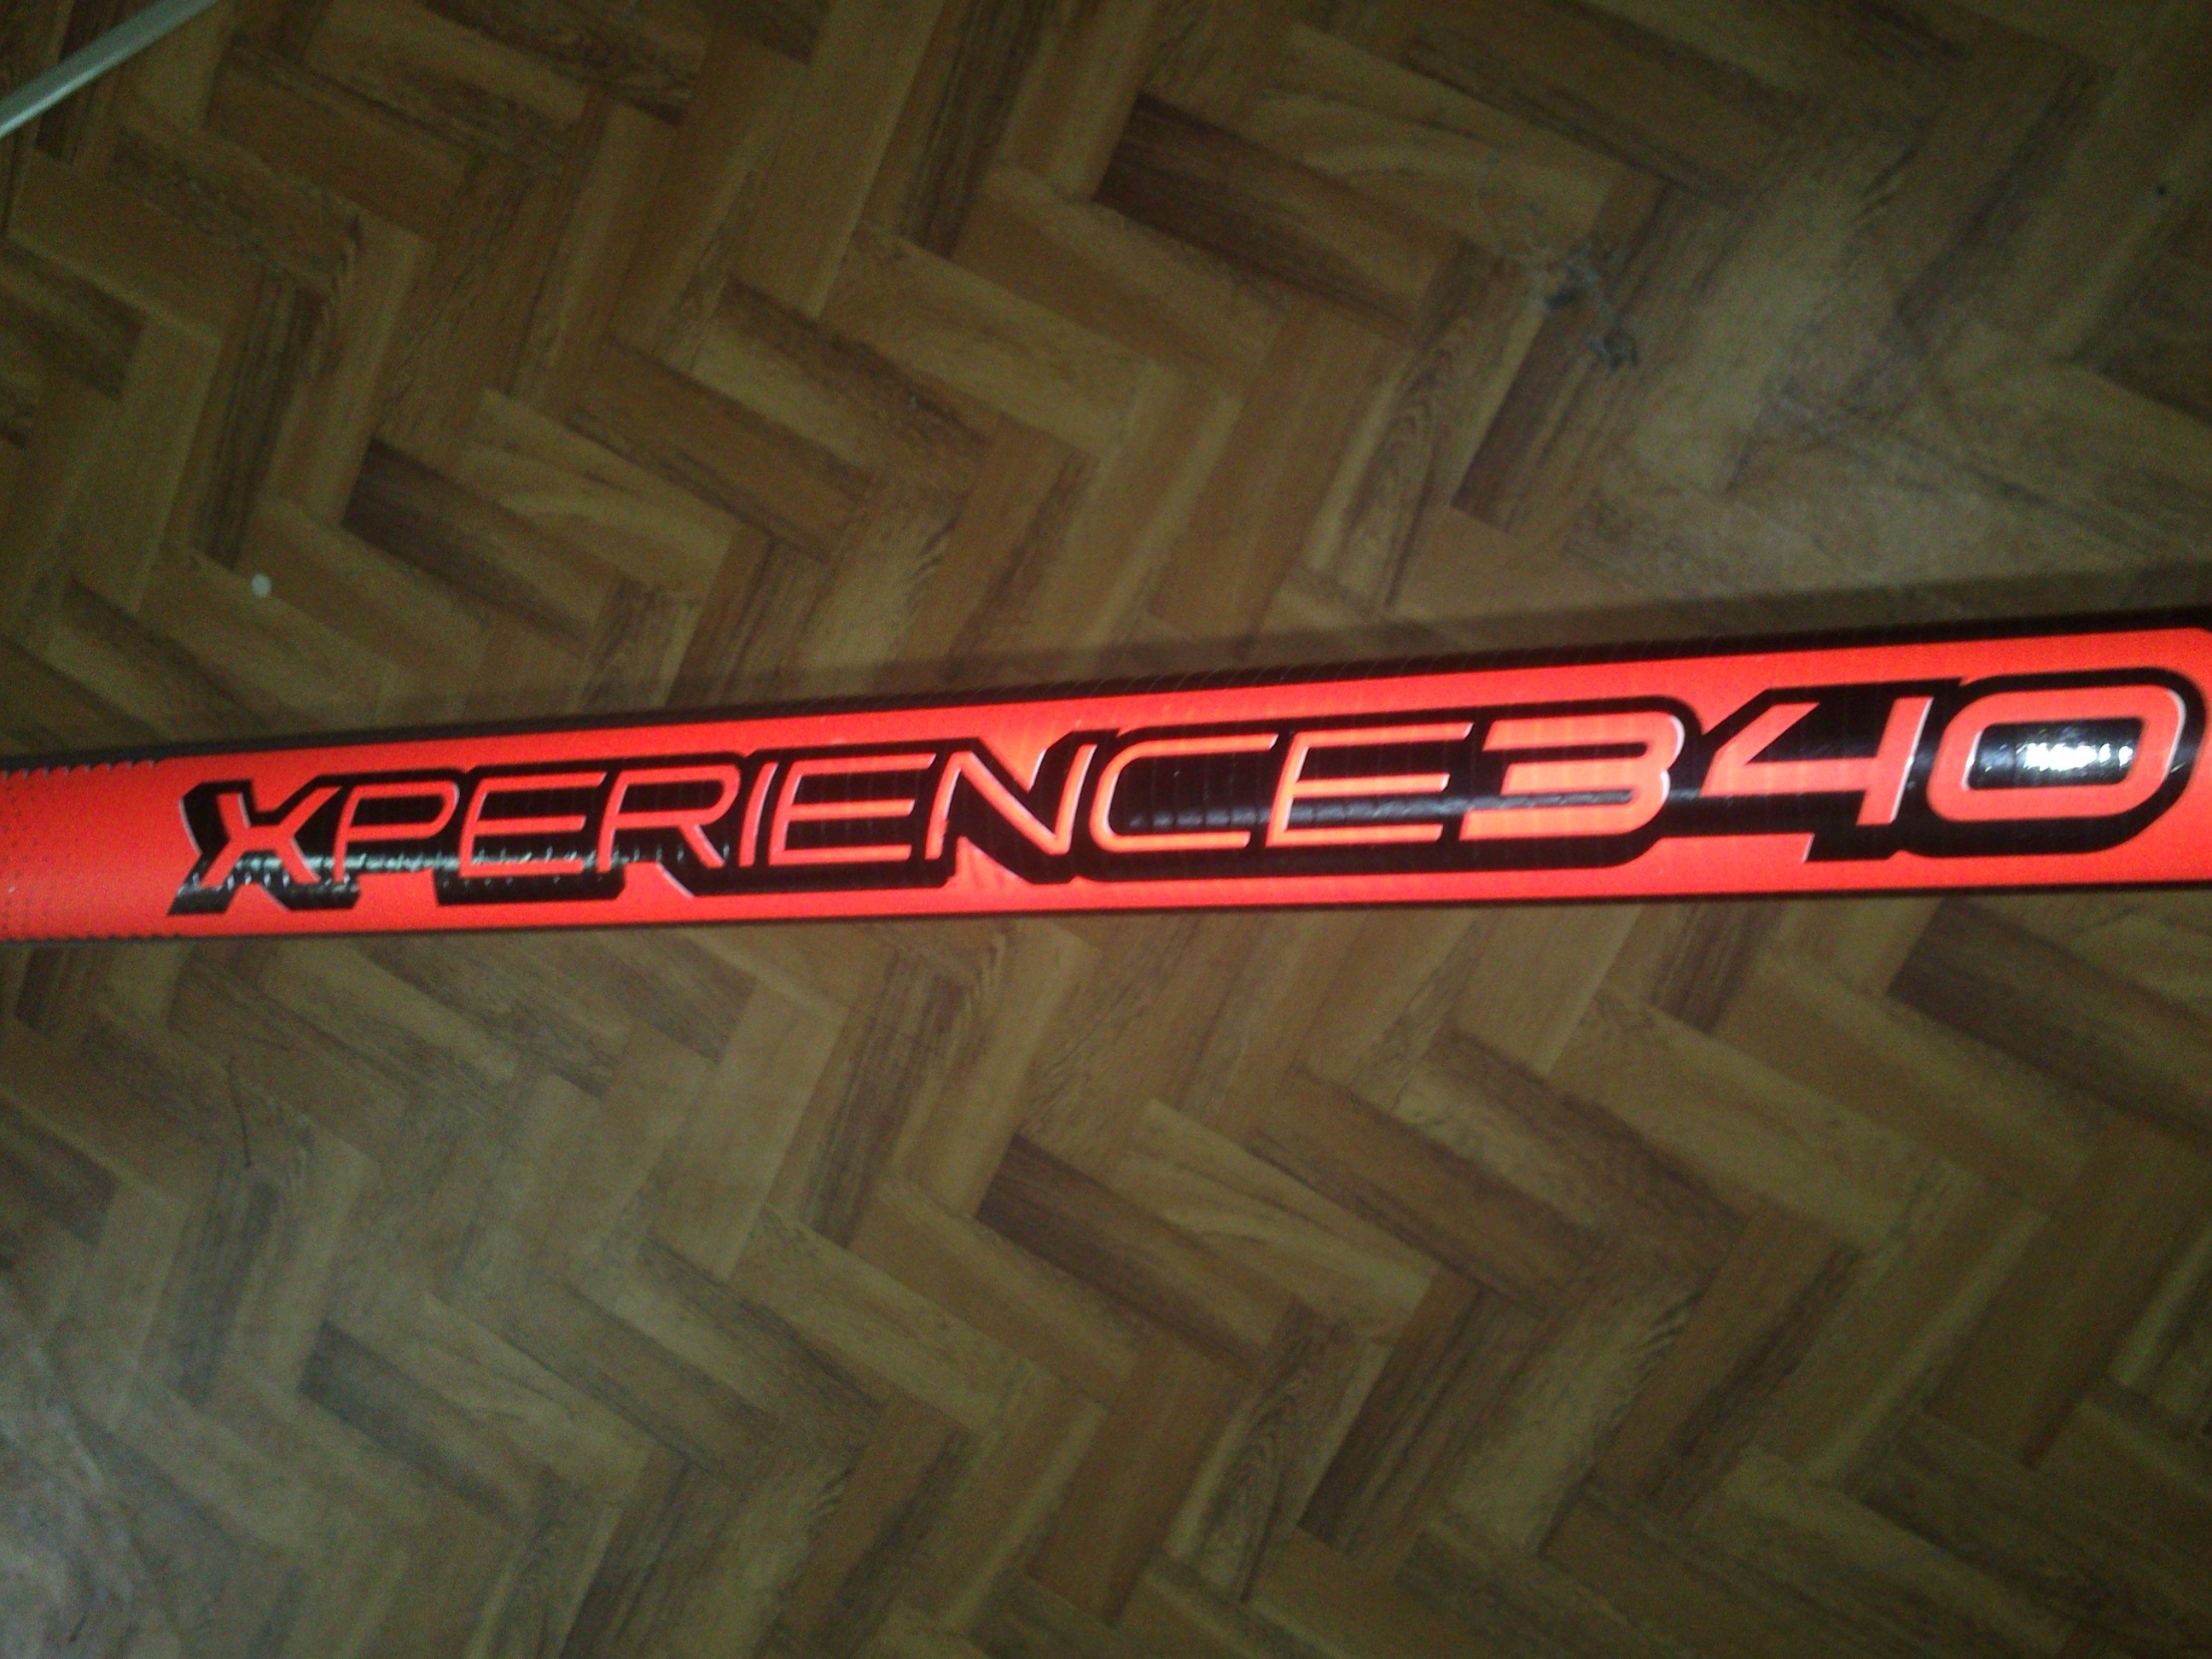 xperience 340